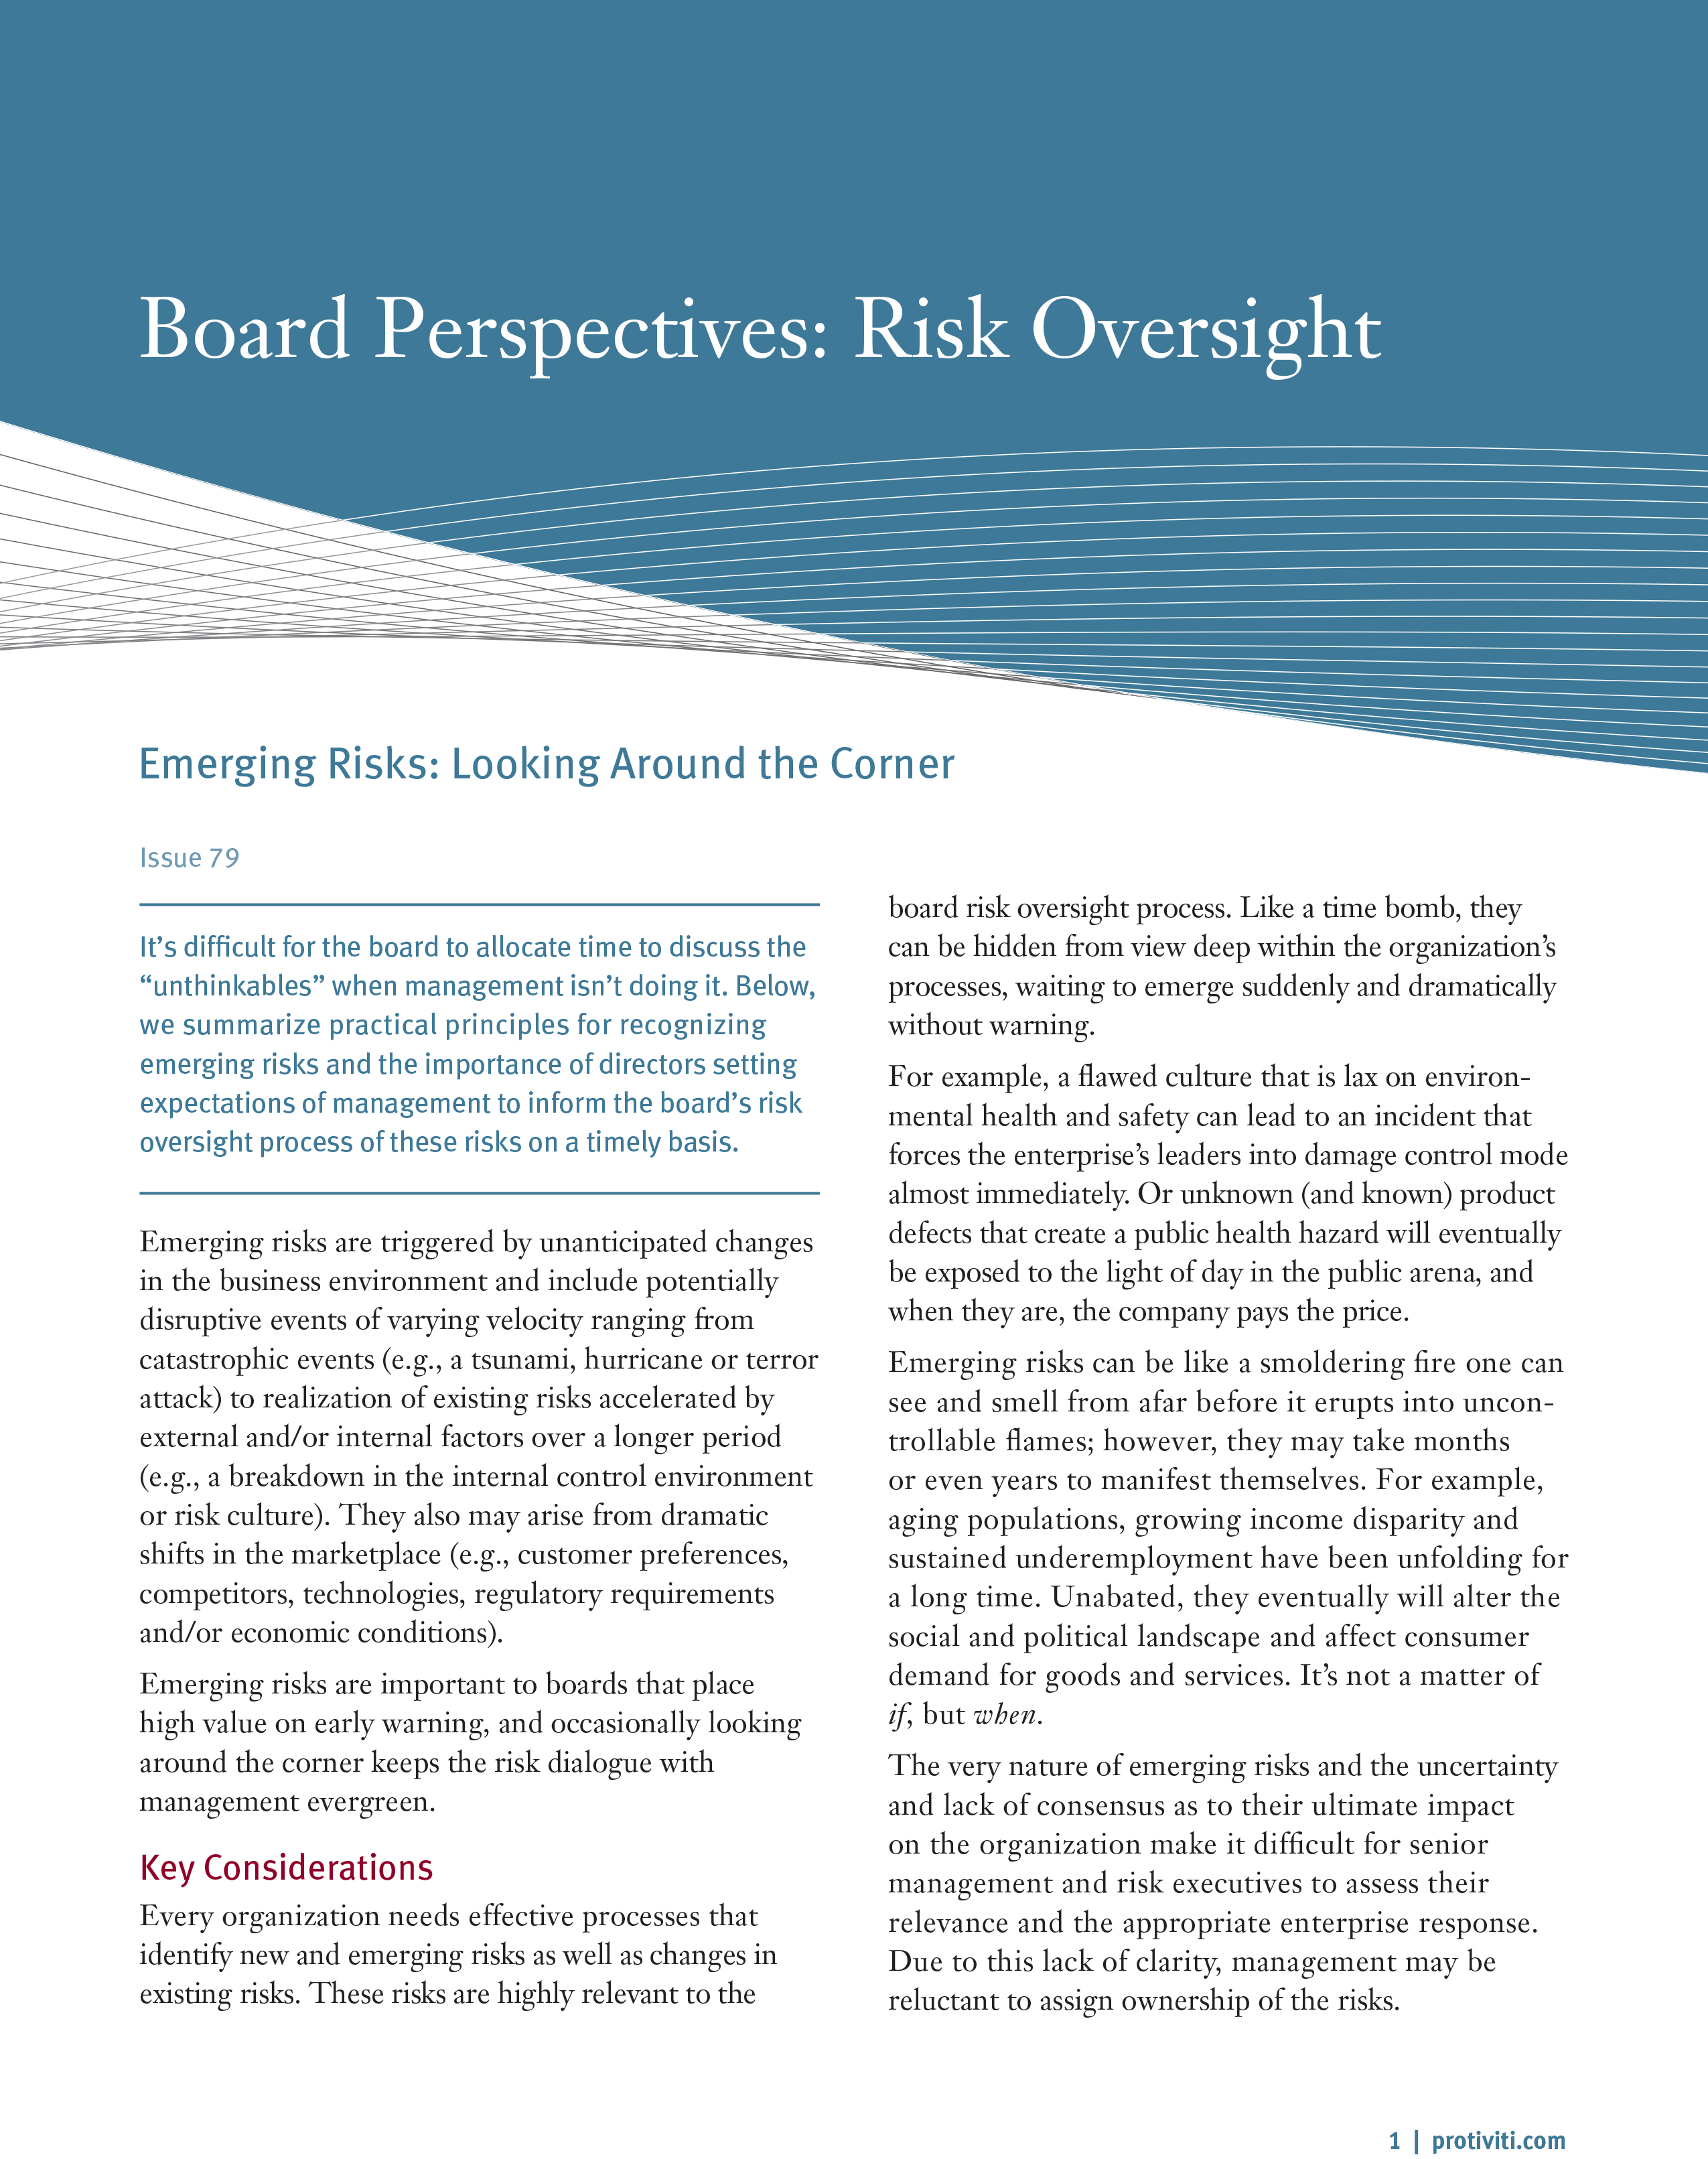 Screenshot of the first page of Emerging Risks Looking Around the Corner